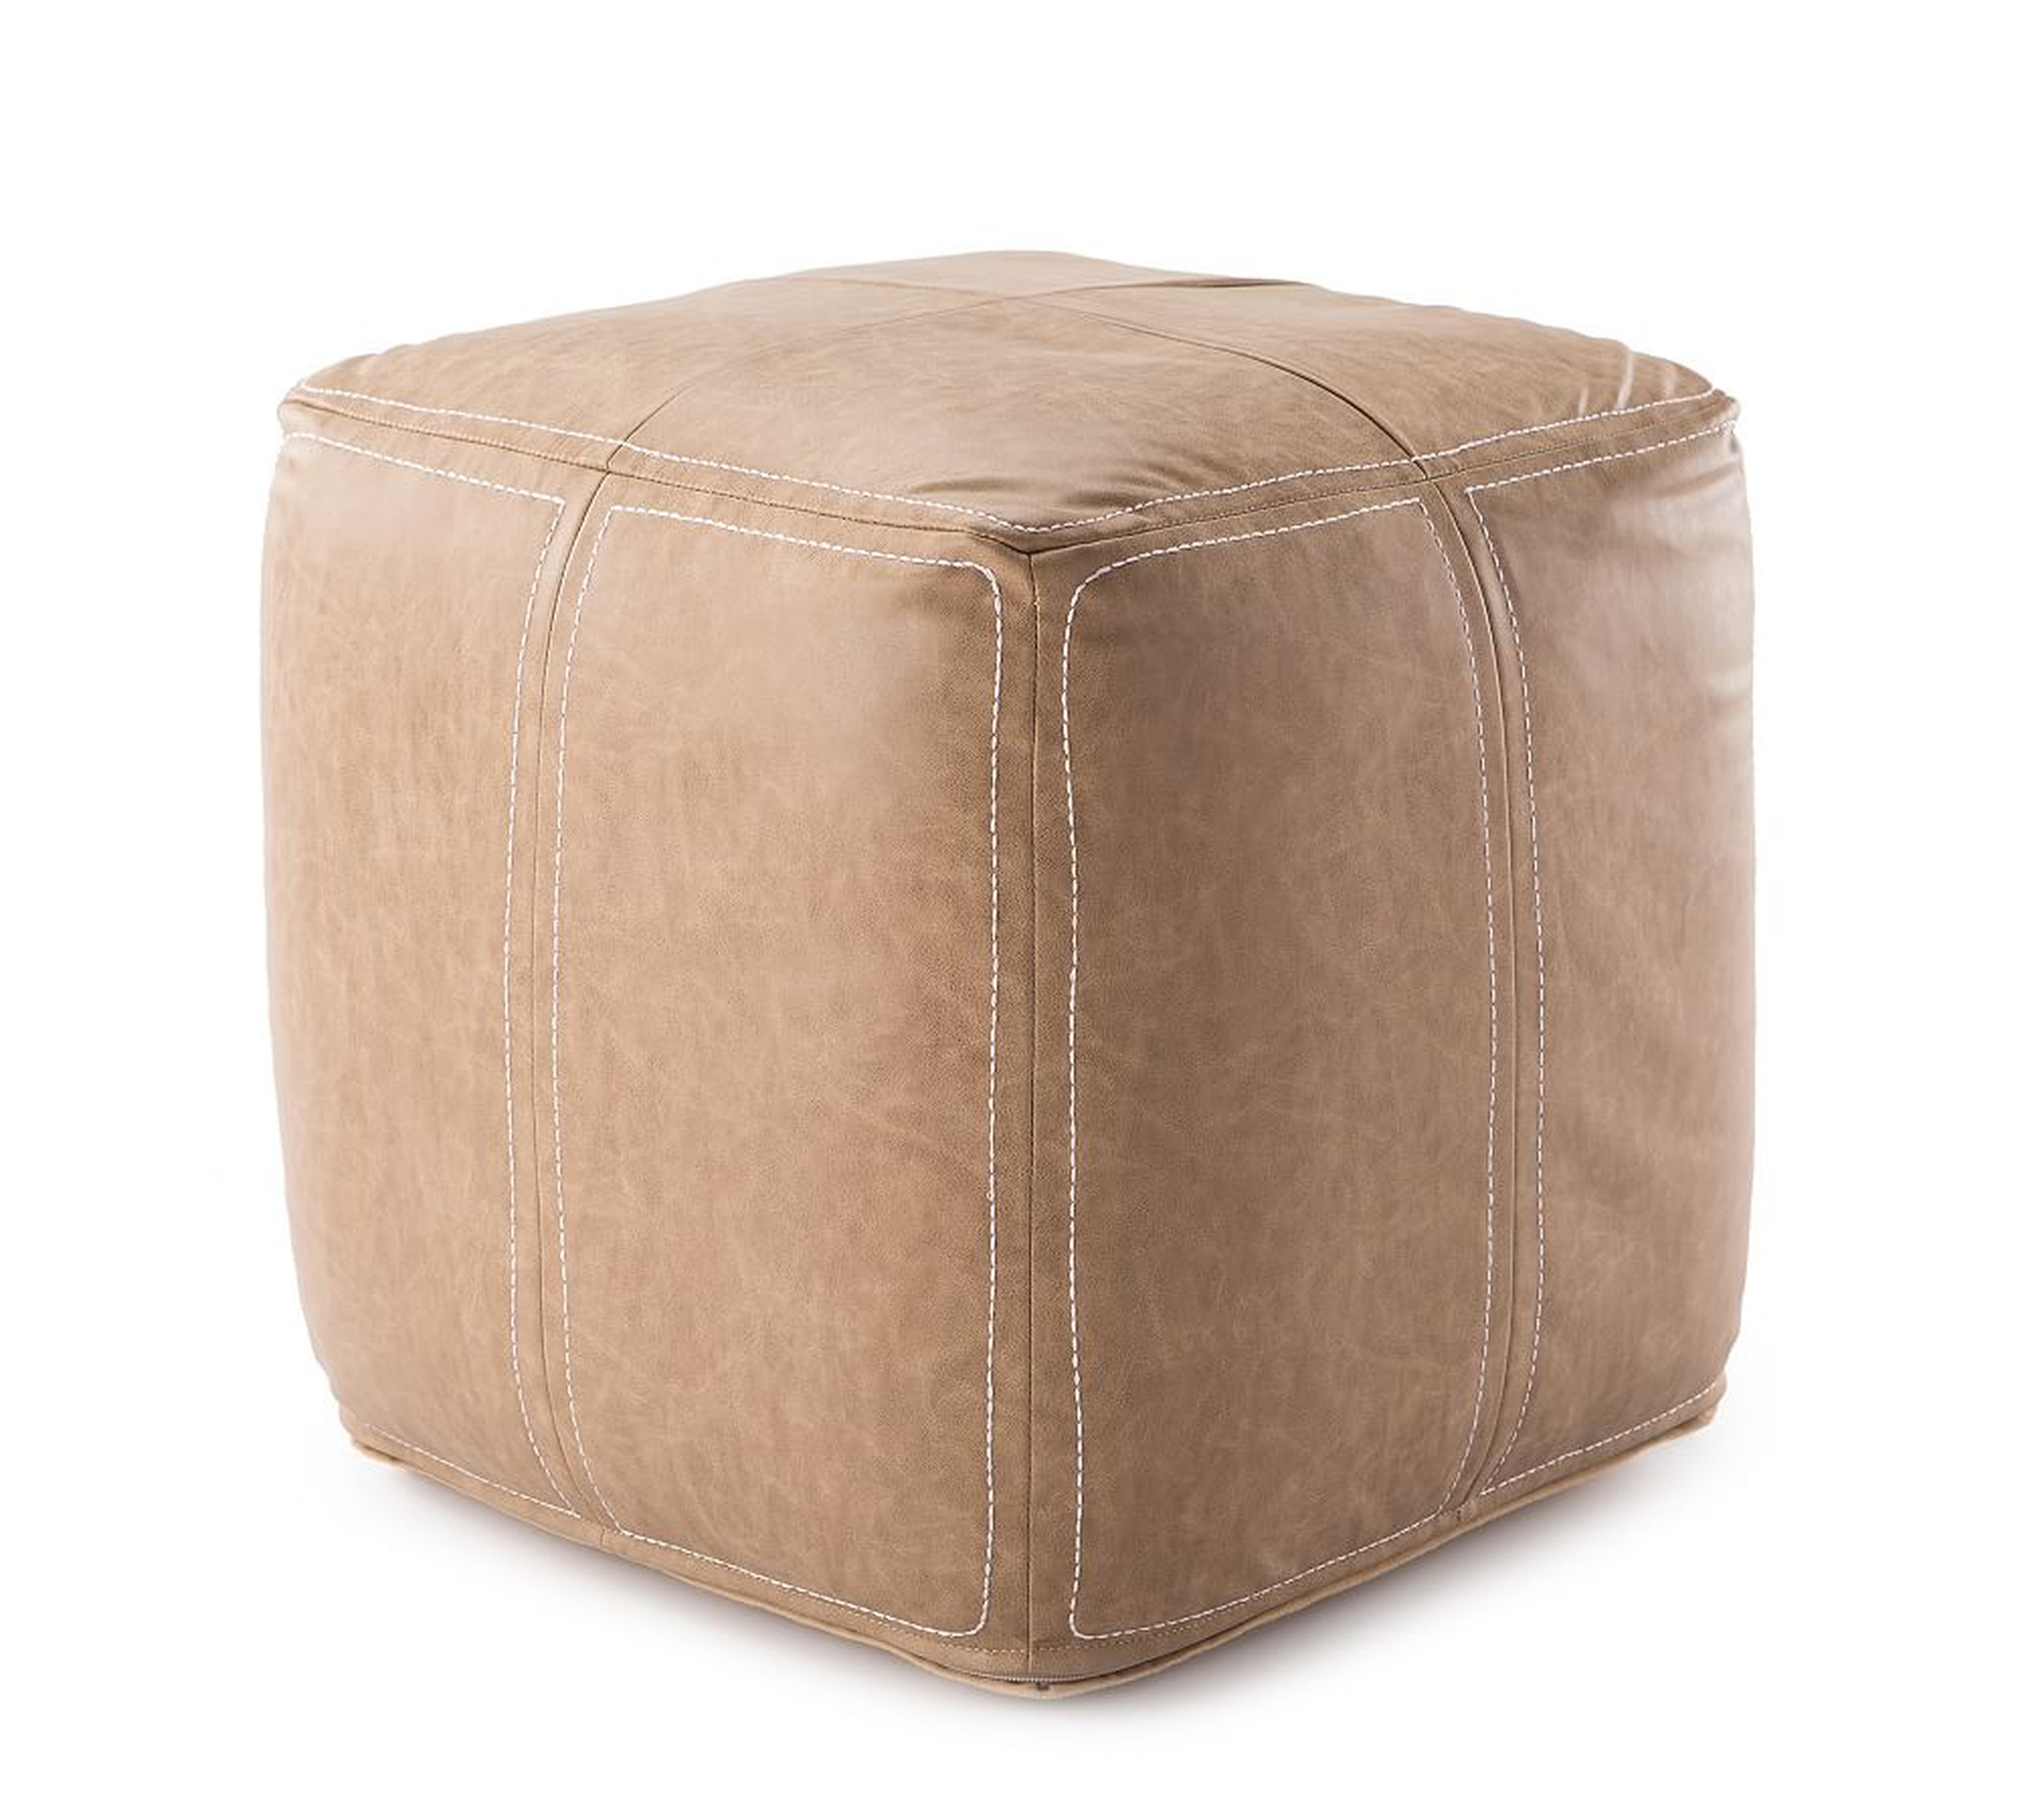 Faux Leather Handwoven Pouf, 18" x 18" x 18", Taupe - Pottery Barn